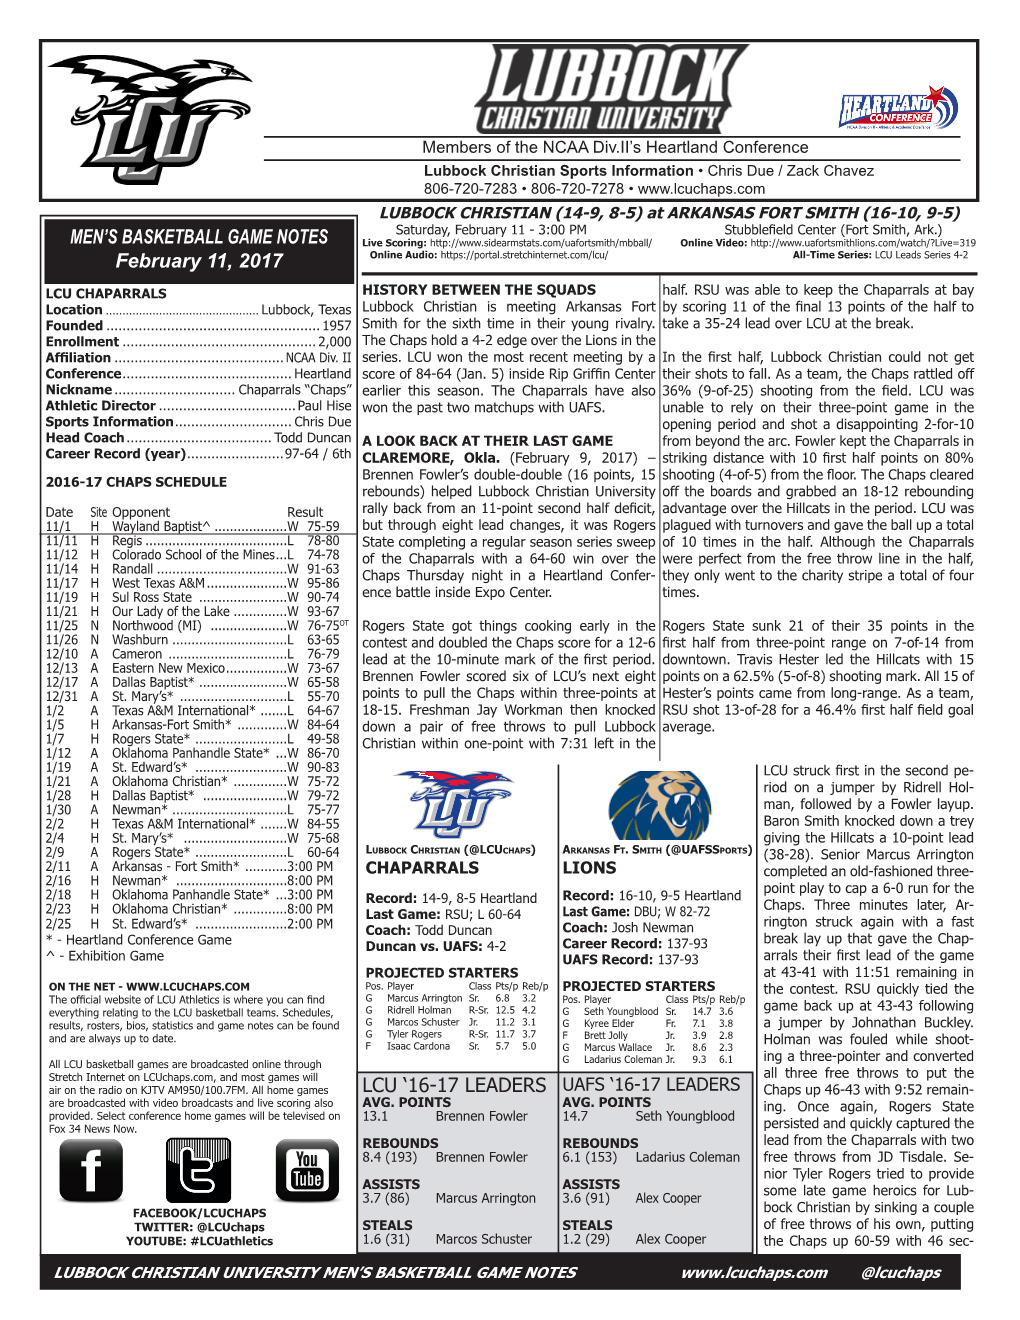 MEN's BASKETBALL GAME NOTES February 11, 2017 LCU '16-17